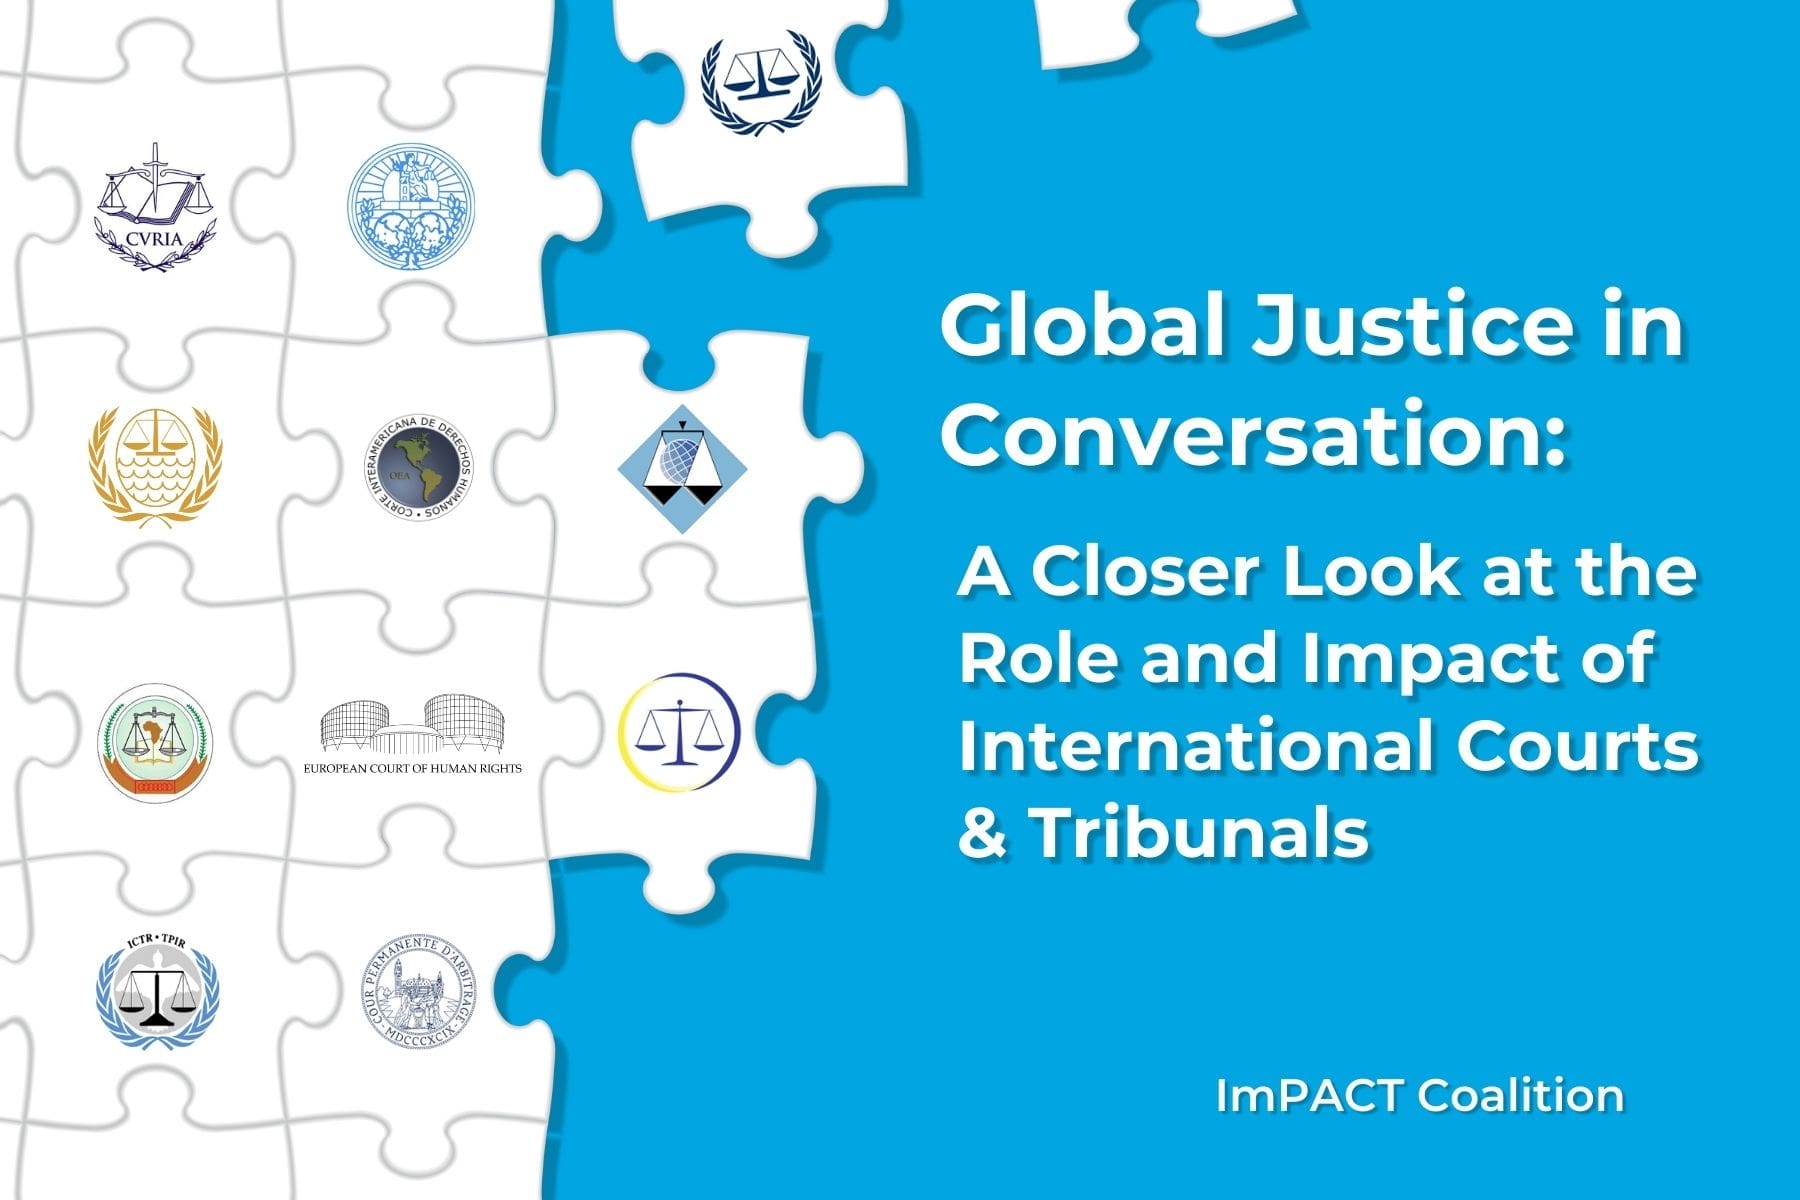 Session I | Global Justice in Conversation: Successes in Nuclear Nonproliferation & Disarmament